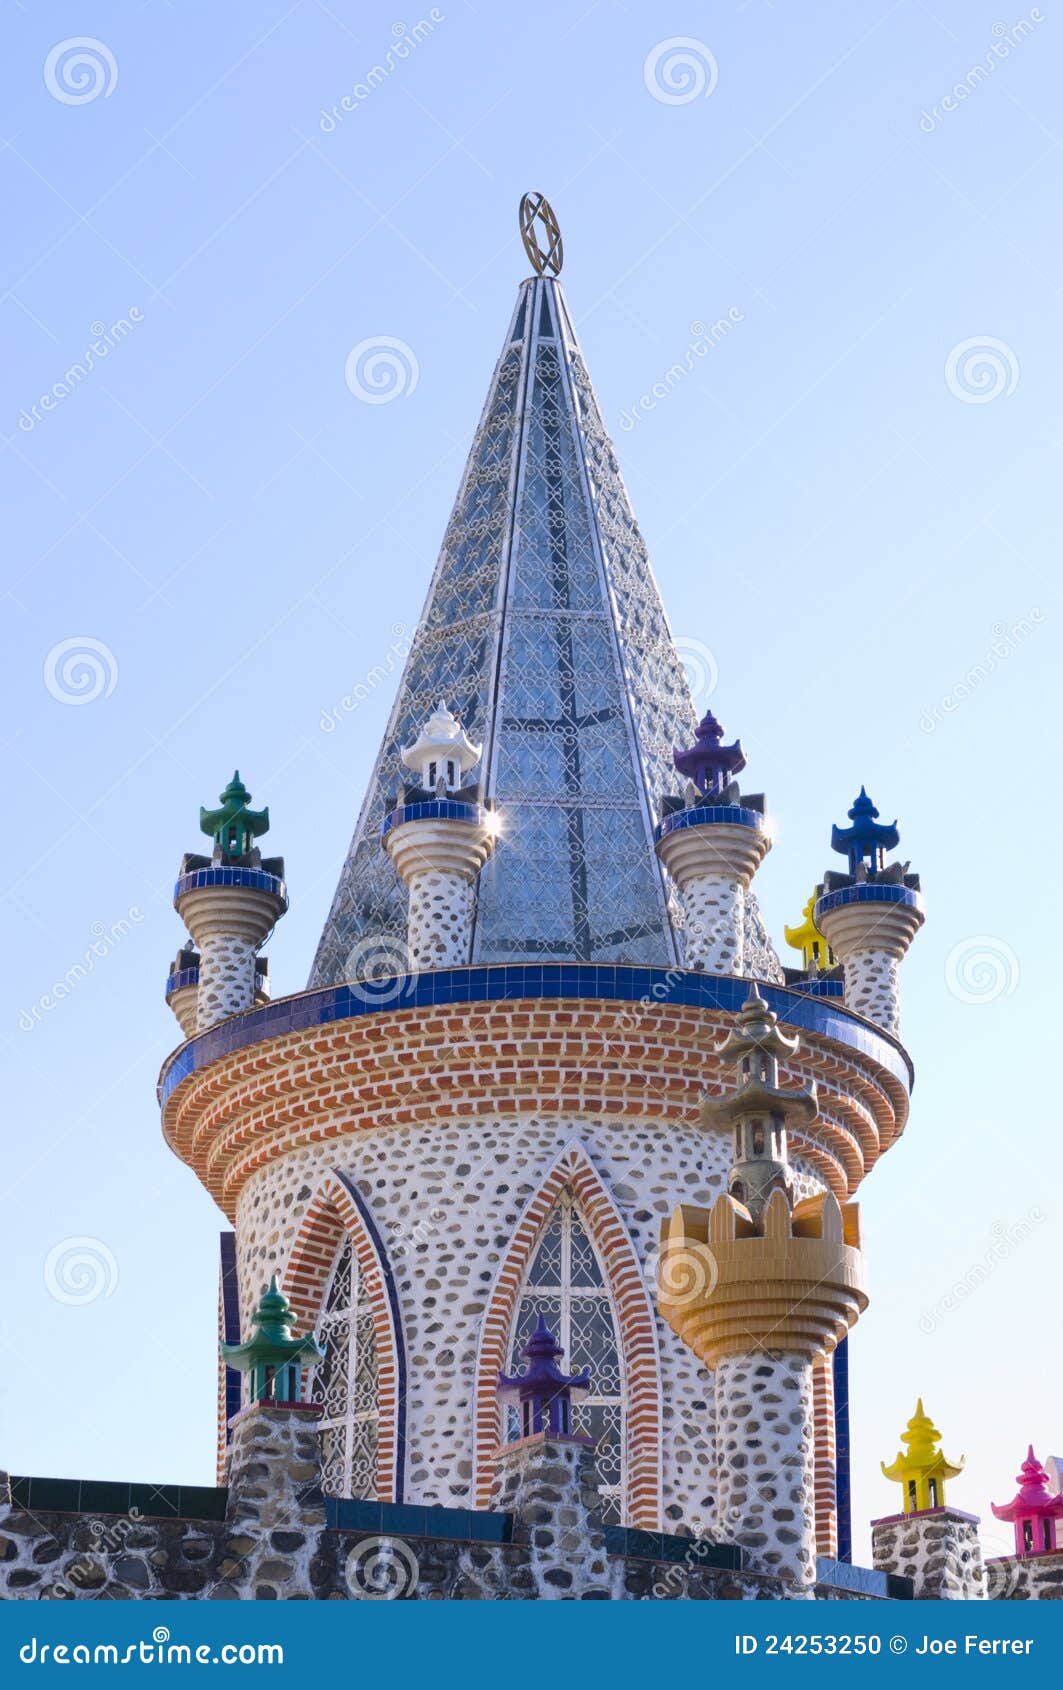 foco tonal tower and turrets